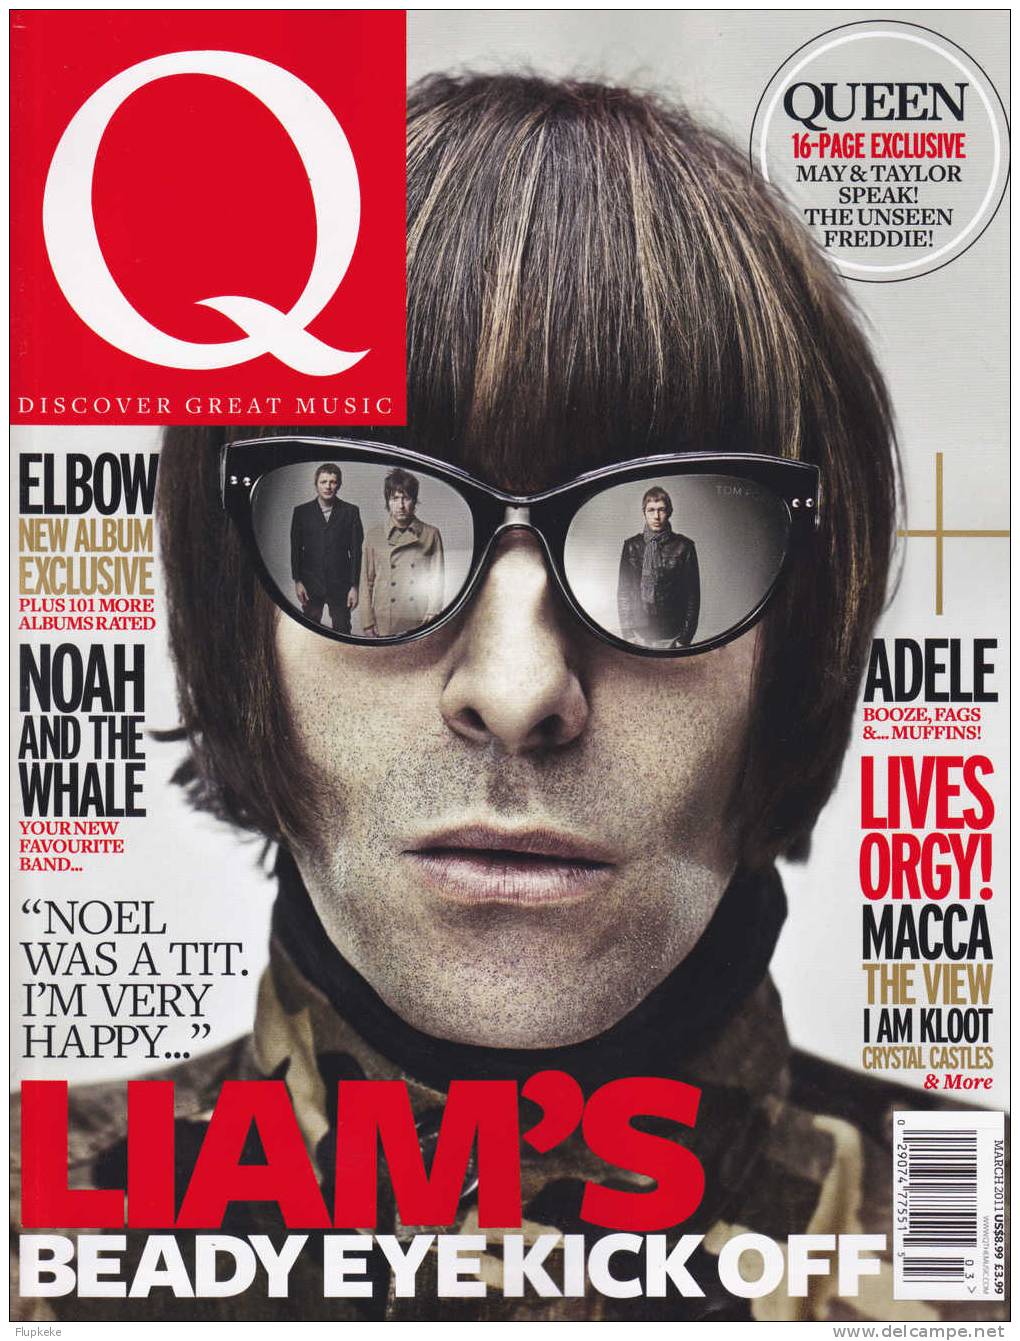 Q 296 March 2011 Liam´s Beady Eye Kick Off Queen 16 Page Exclusive - Amusement